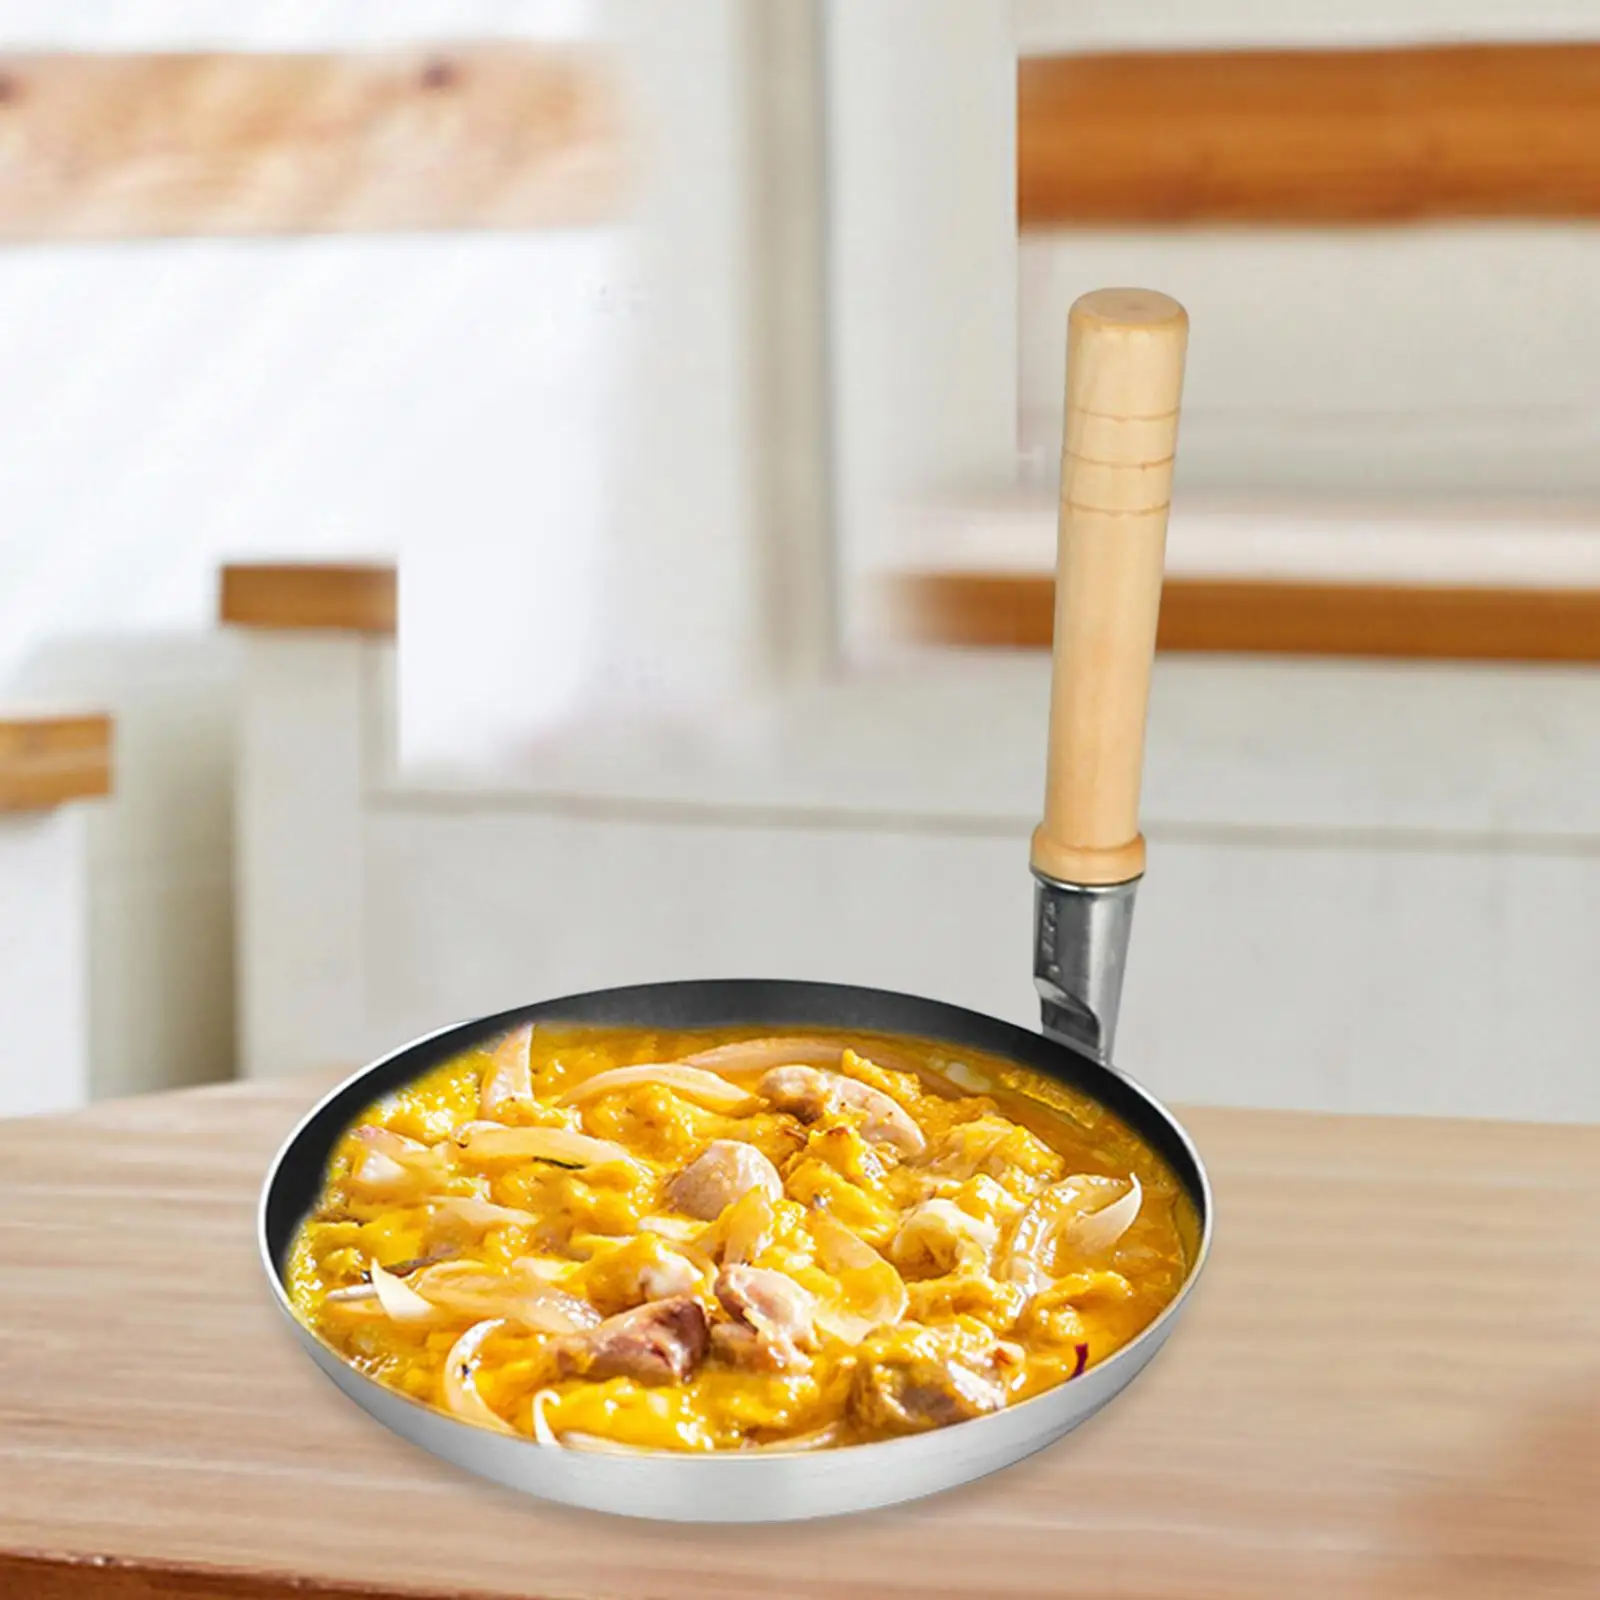 Standing frying pan wooden handle Japanese accessories manufacturer for cooking